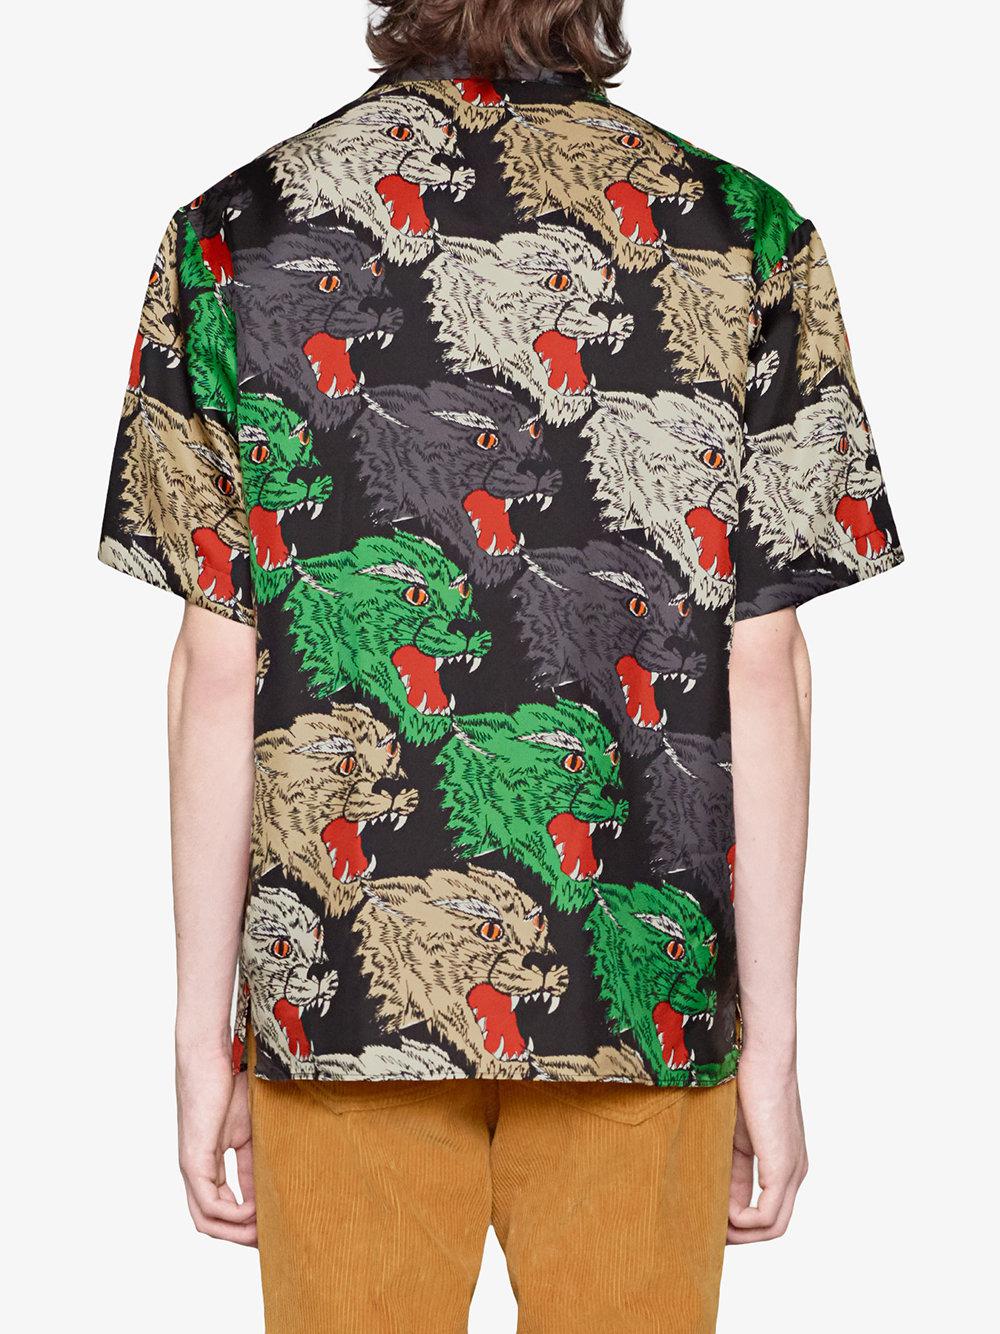 Gucci Silk Panther Face Bowling Shirt in Pearl (Green) for Men - Lyst